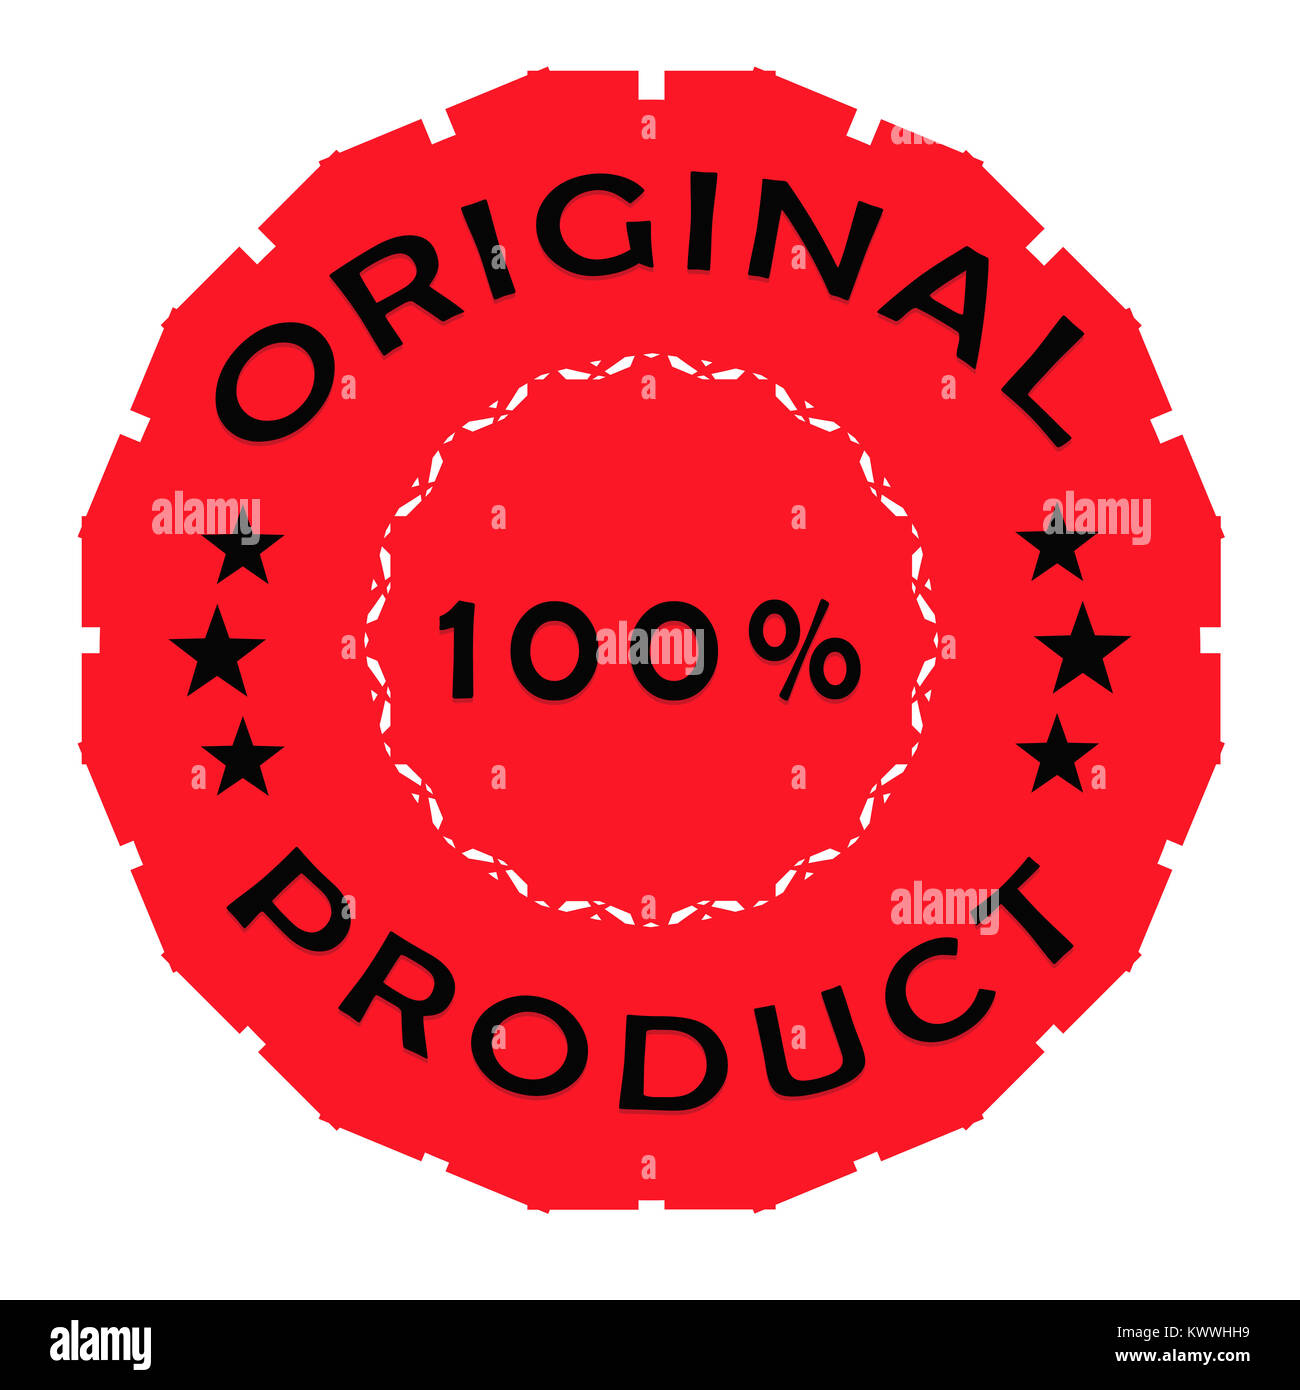 Original product red label with black text on a white background Stock Photo